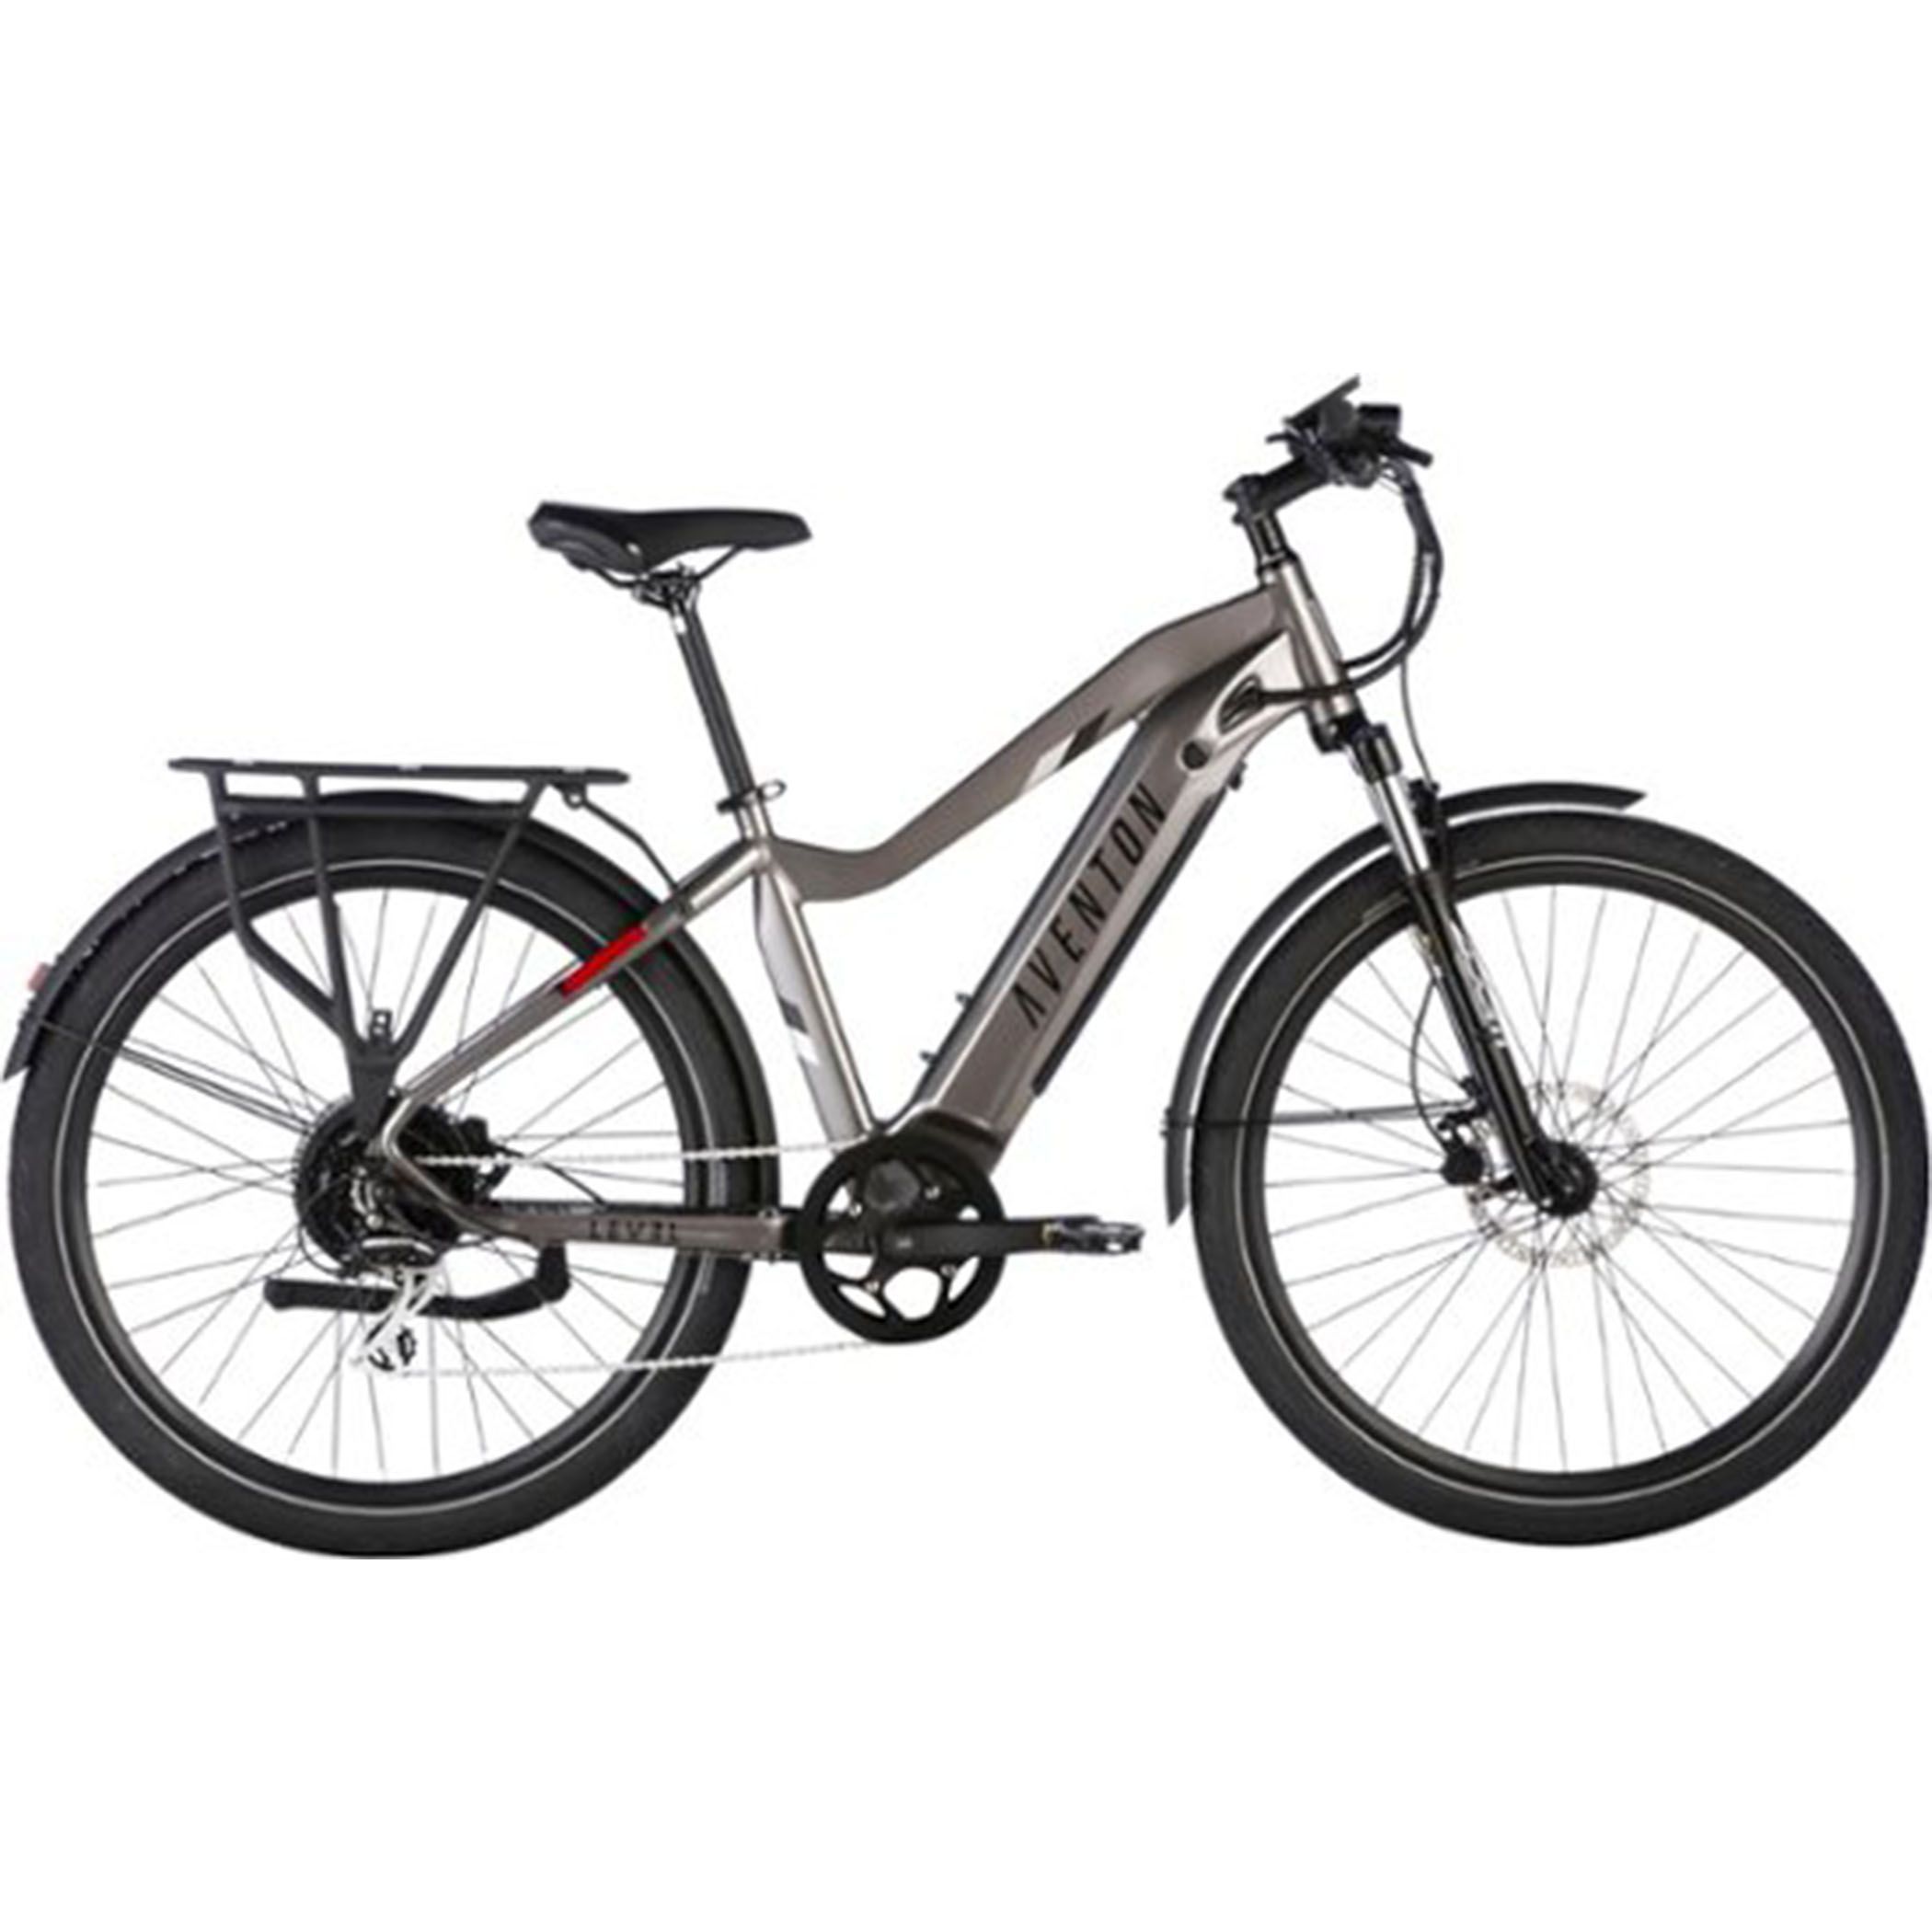 <p><strong>$1699.00</strong></p><p><a href="https://go.redirectingat.com?id=74968X1553576&url=https%3A%2F%2Fwww.aventon.com%2Fproducts%2Faventon-level-commuter-ebike&sref=https%3A%2F%2Fwww.roadandtrack.com%2Fgear%2Flifestyle%2Fg46464030%2Fbest-electric-bikes%2F">Shop Now</a></p><p>The Level.2 from Aventon builds on the solid success of its first-generation Level commuter bikes. The Level.2 is a Class 2 e-bike, featuring both pedal assist and a throttle that can reach speeds of up to 20 mph. However, it has the capability to be unlocked to a Class 3 e-bike, allowing for pedal-assisted speeds of up to 28 mph. </p><p>This second-generation version of the Level includes a new torque sensor, integrated lights, and a smaller user-friendly display. The testers at <em>Bicycling </em><a href="https://go.skimresources.com/?id=74968X1576257&isjs=1&jv=15.4.2-stackpath&sref=https%3A%2F%2Fwww.bicycling.com%2Fbikes-gear%2Fa22132137%2Fbest-electric-bikes%2F&url=https%3A%2F%2Fwww.aventon.com%2Fproducts%2Faventon-level-commuter-ebike&xs=1&xtz=300&xuuid=8f1c601edc6c054e5ec1f62edc63eae1&xjsf=other_click__contextmenu+%5B2%5D">noted</a> that the Level.2 bested their expectations in every situation, saying "the Aventon Level remains the best commuter electric bicycle you can purchase for less than $2000 and one of the best commuter bikes you can buy overall."</p>